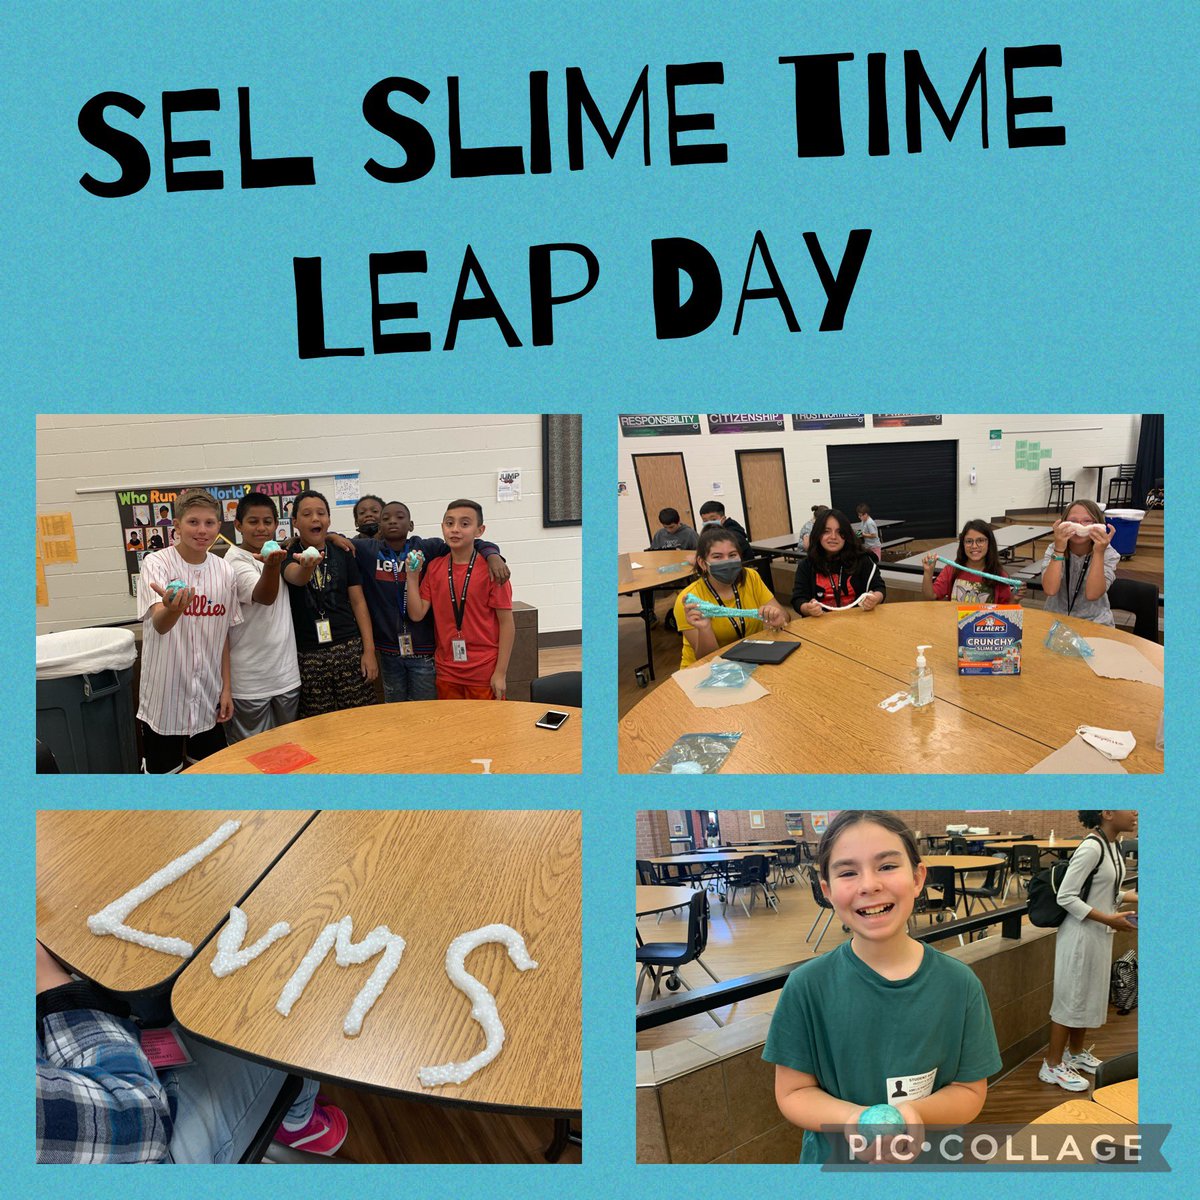 I love me a good LEAP day! So much fun! #TheLakeviewWay #WeAreLakeview #LVMSLEAPDAY